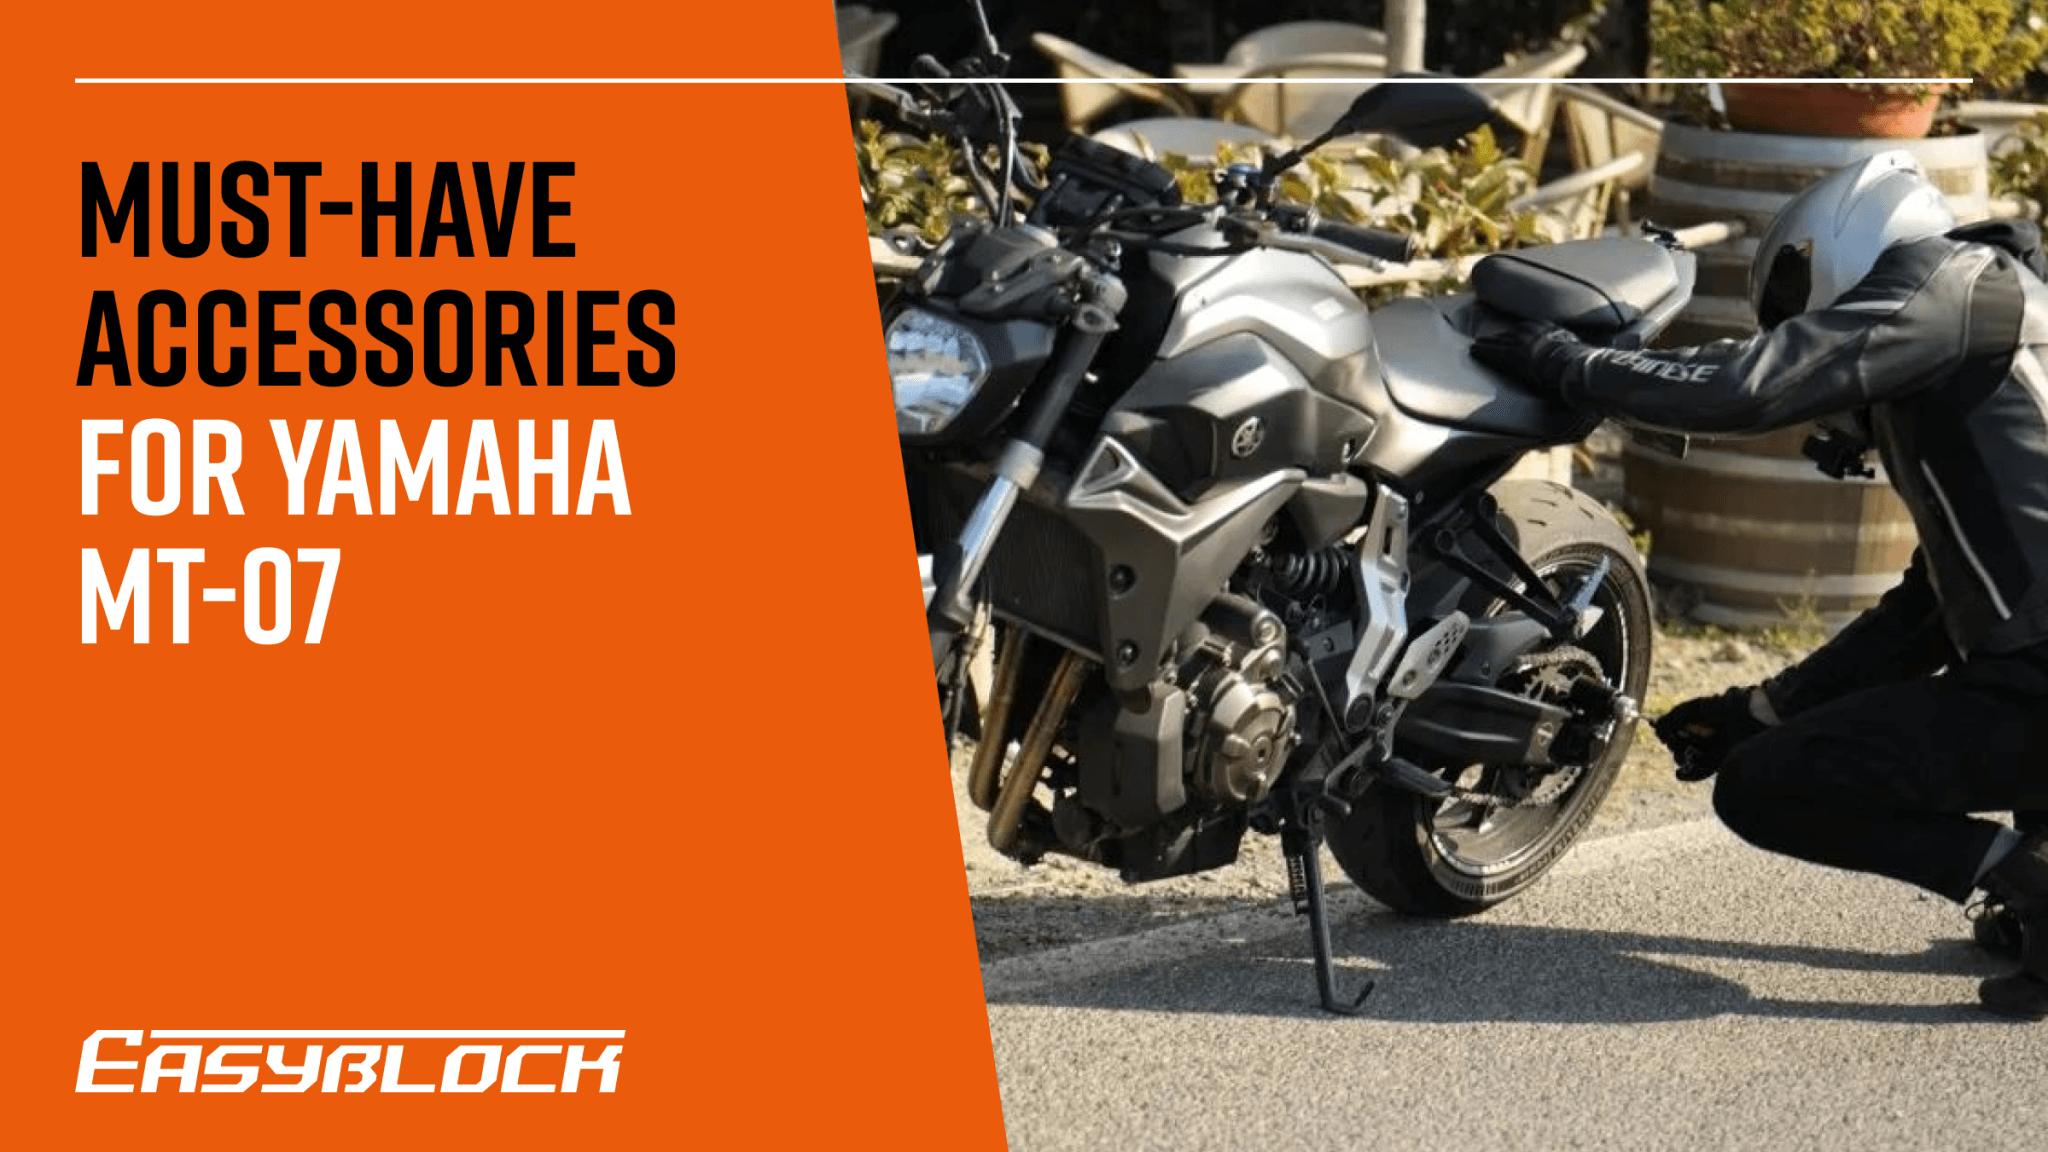 Must-Have Accessories for Yamaha MT-07